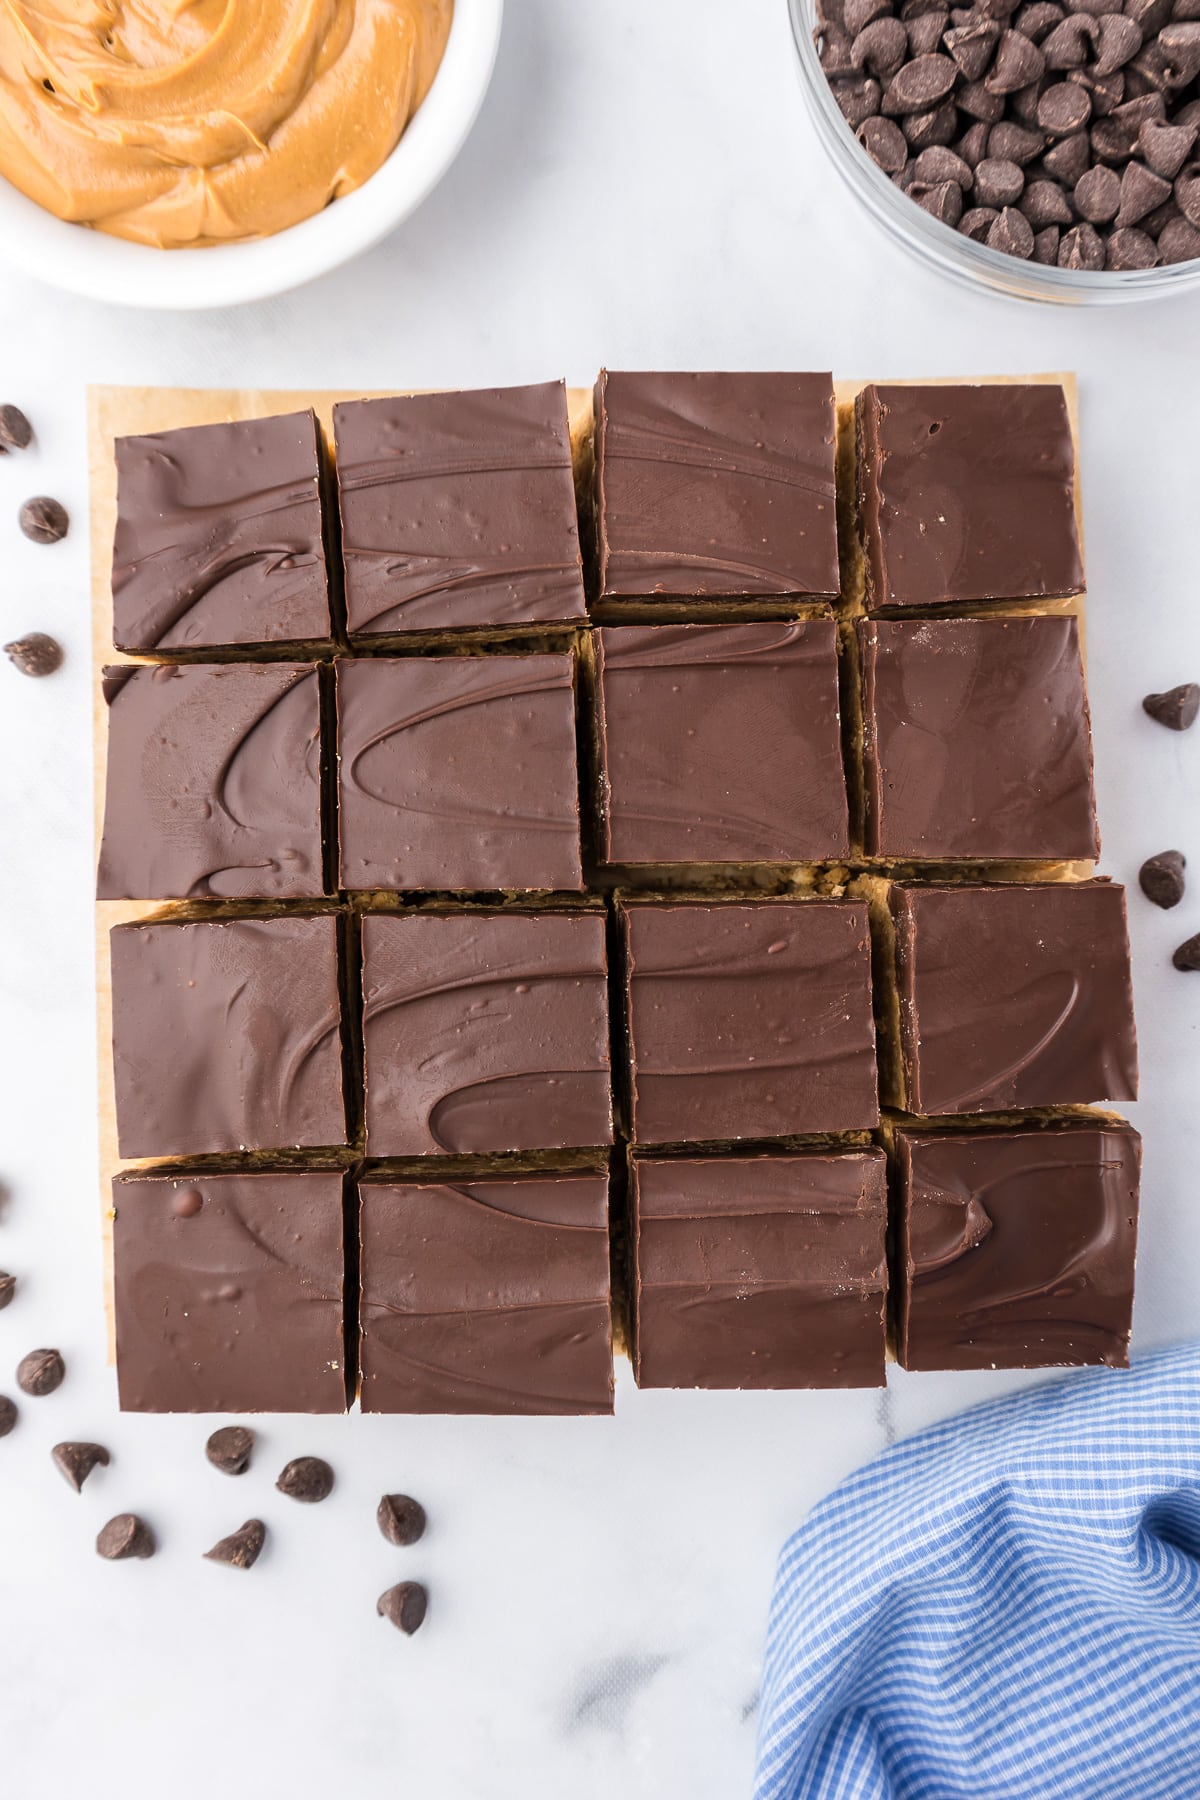 Peanut butter bars topped with chocolate sliced into pieces from above on parchment paper.